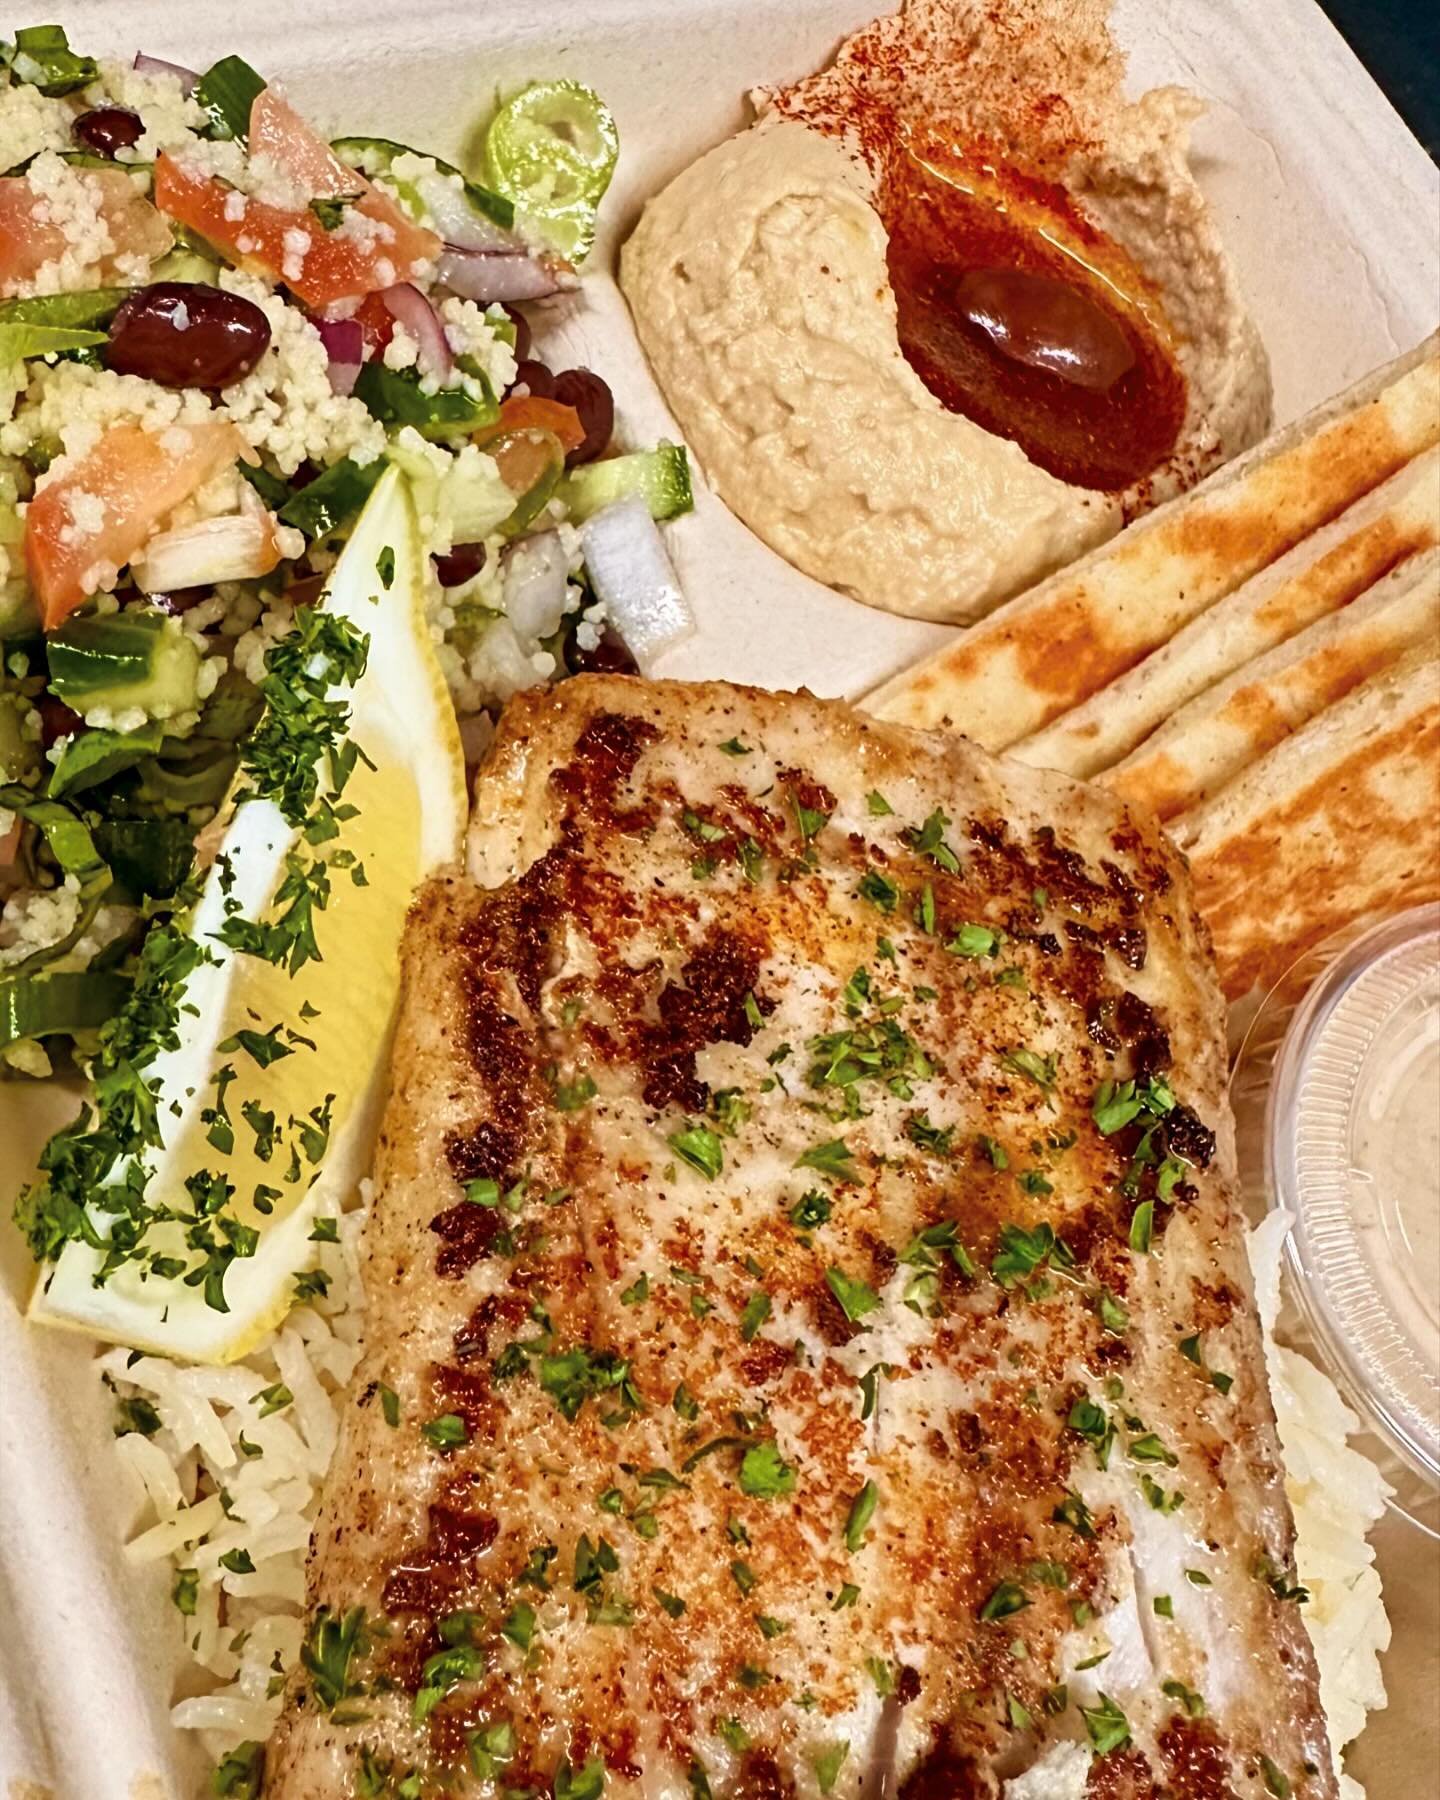 This week&rsquo;s Special!

Mahi-Mahi Plate $19.95

Grilled with garlic butter and Mediterranean spices and served with a black bean and couscous salad, rice pilaf, hummus &amp; pita, and tahini sauce. 
@wailukufoodtrucks 
.
.
.
.
.
.
.
.
.
#mahimahi